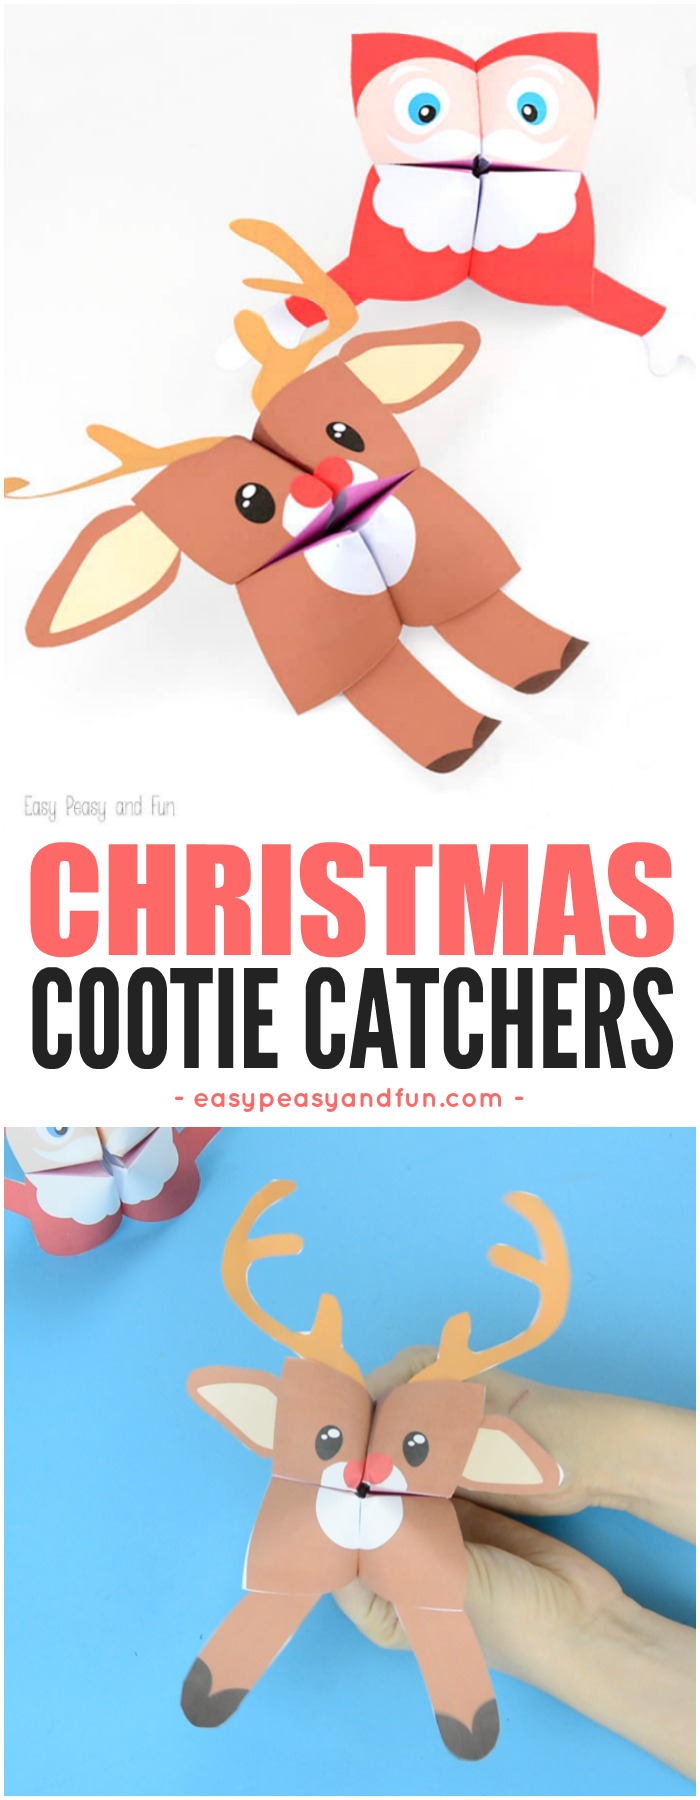 Christmas Cootie Catchers Fortune Teller Characters Easy Peasy And Fun